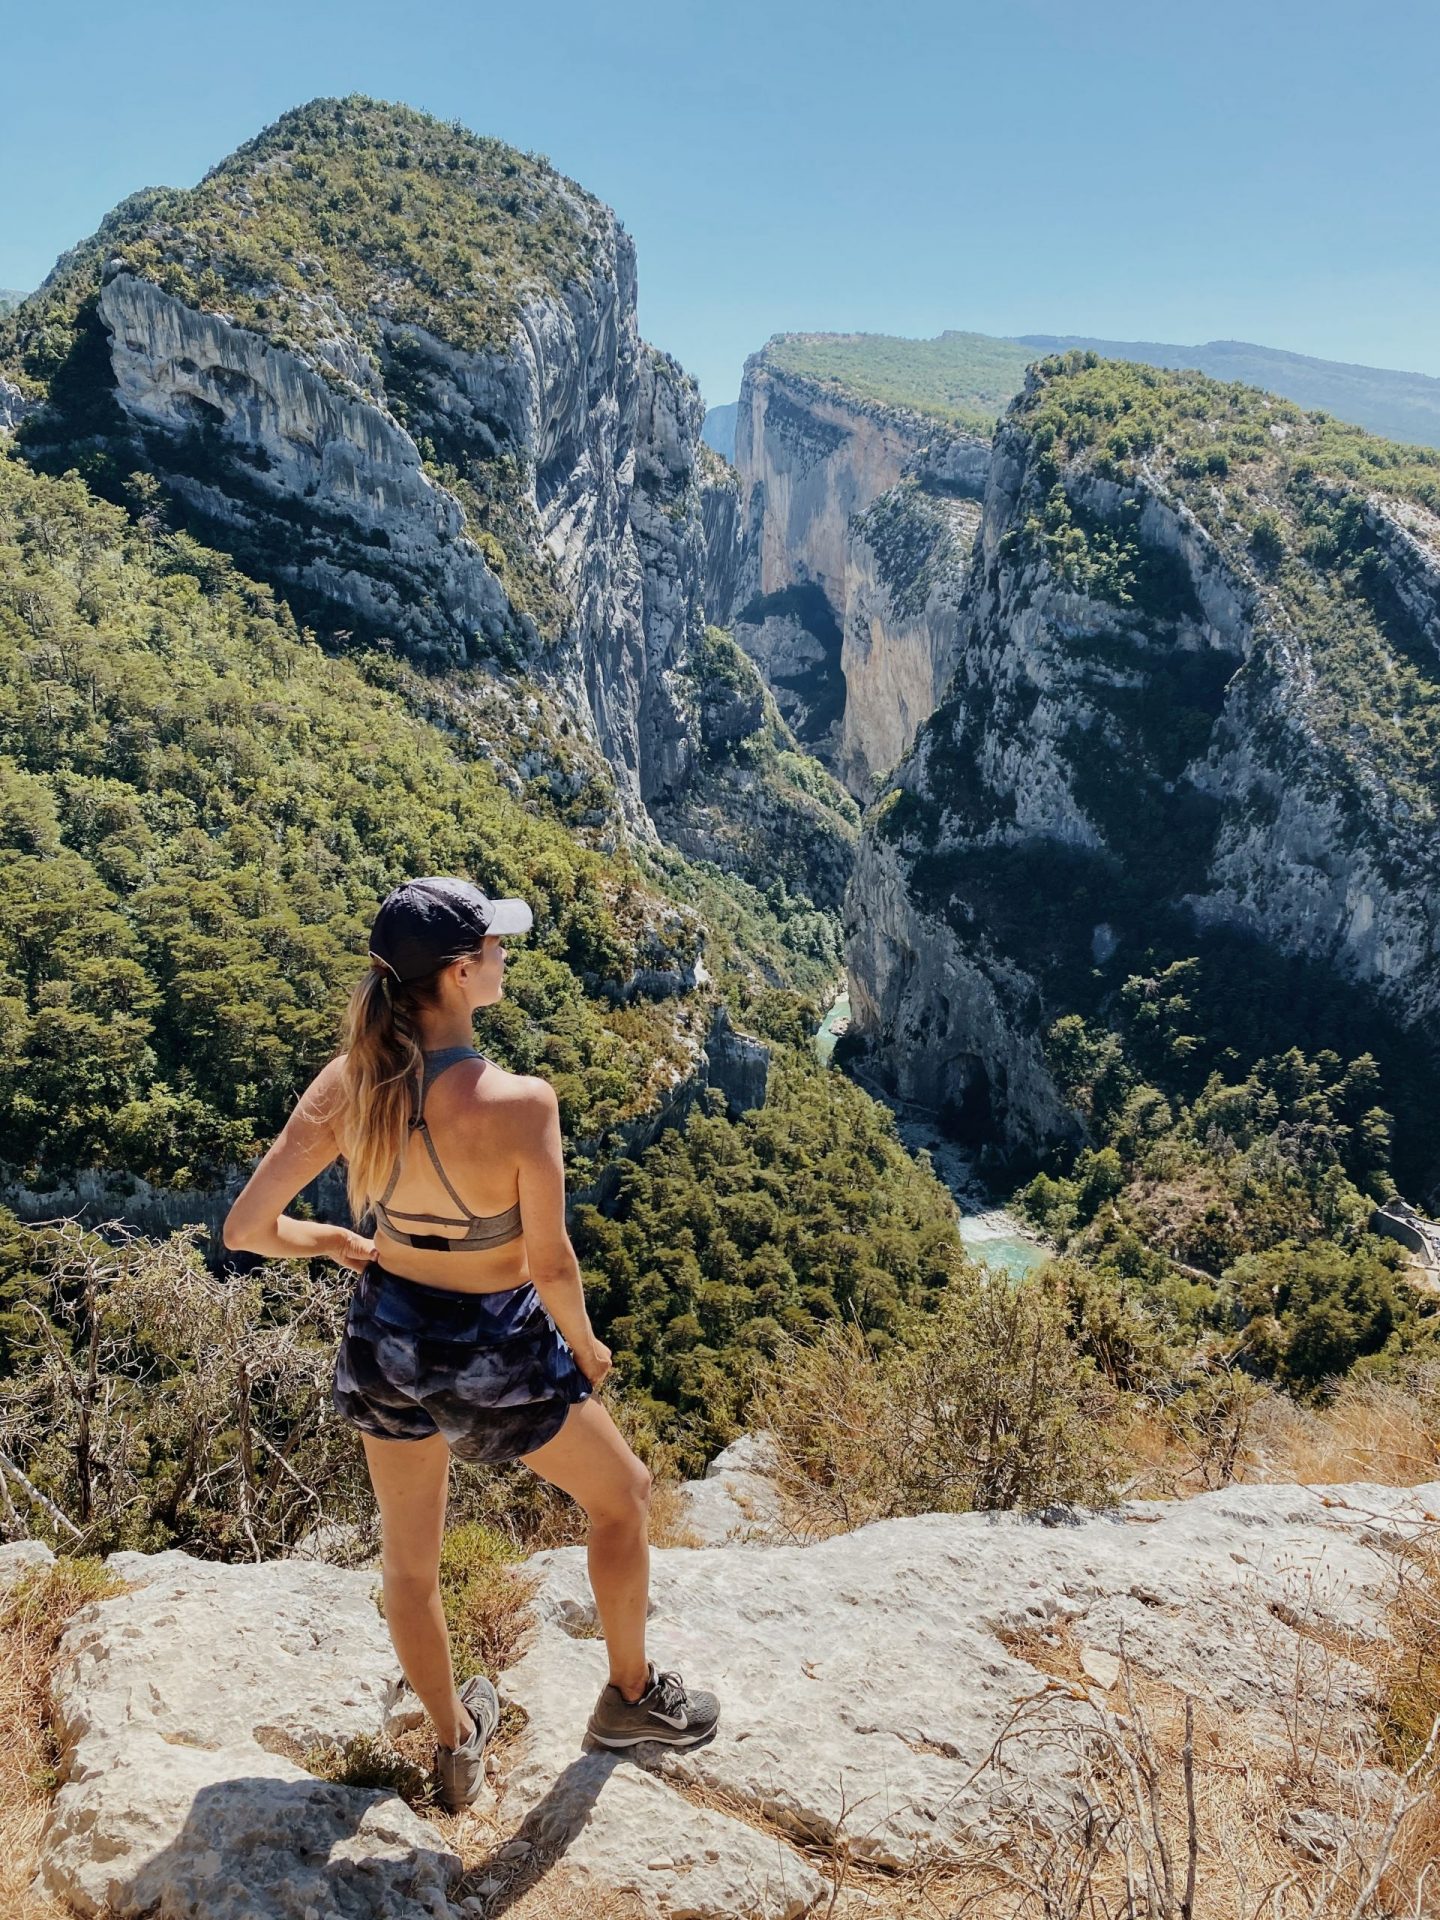 Hike on the Blanc-Martel Trail in the Gorges du Verdon – Europe’s Grand Canyon – France